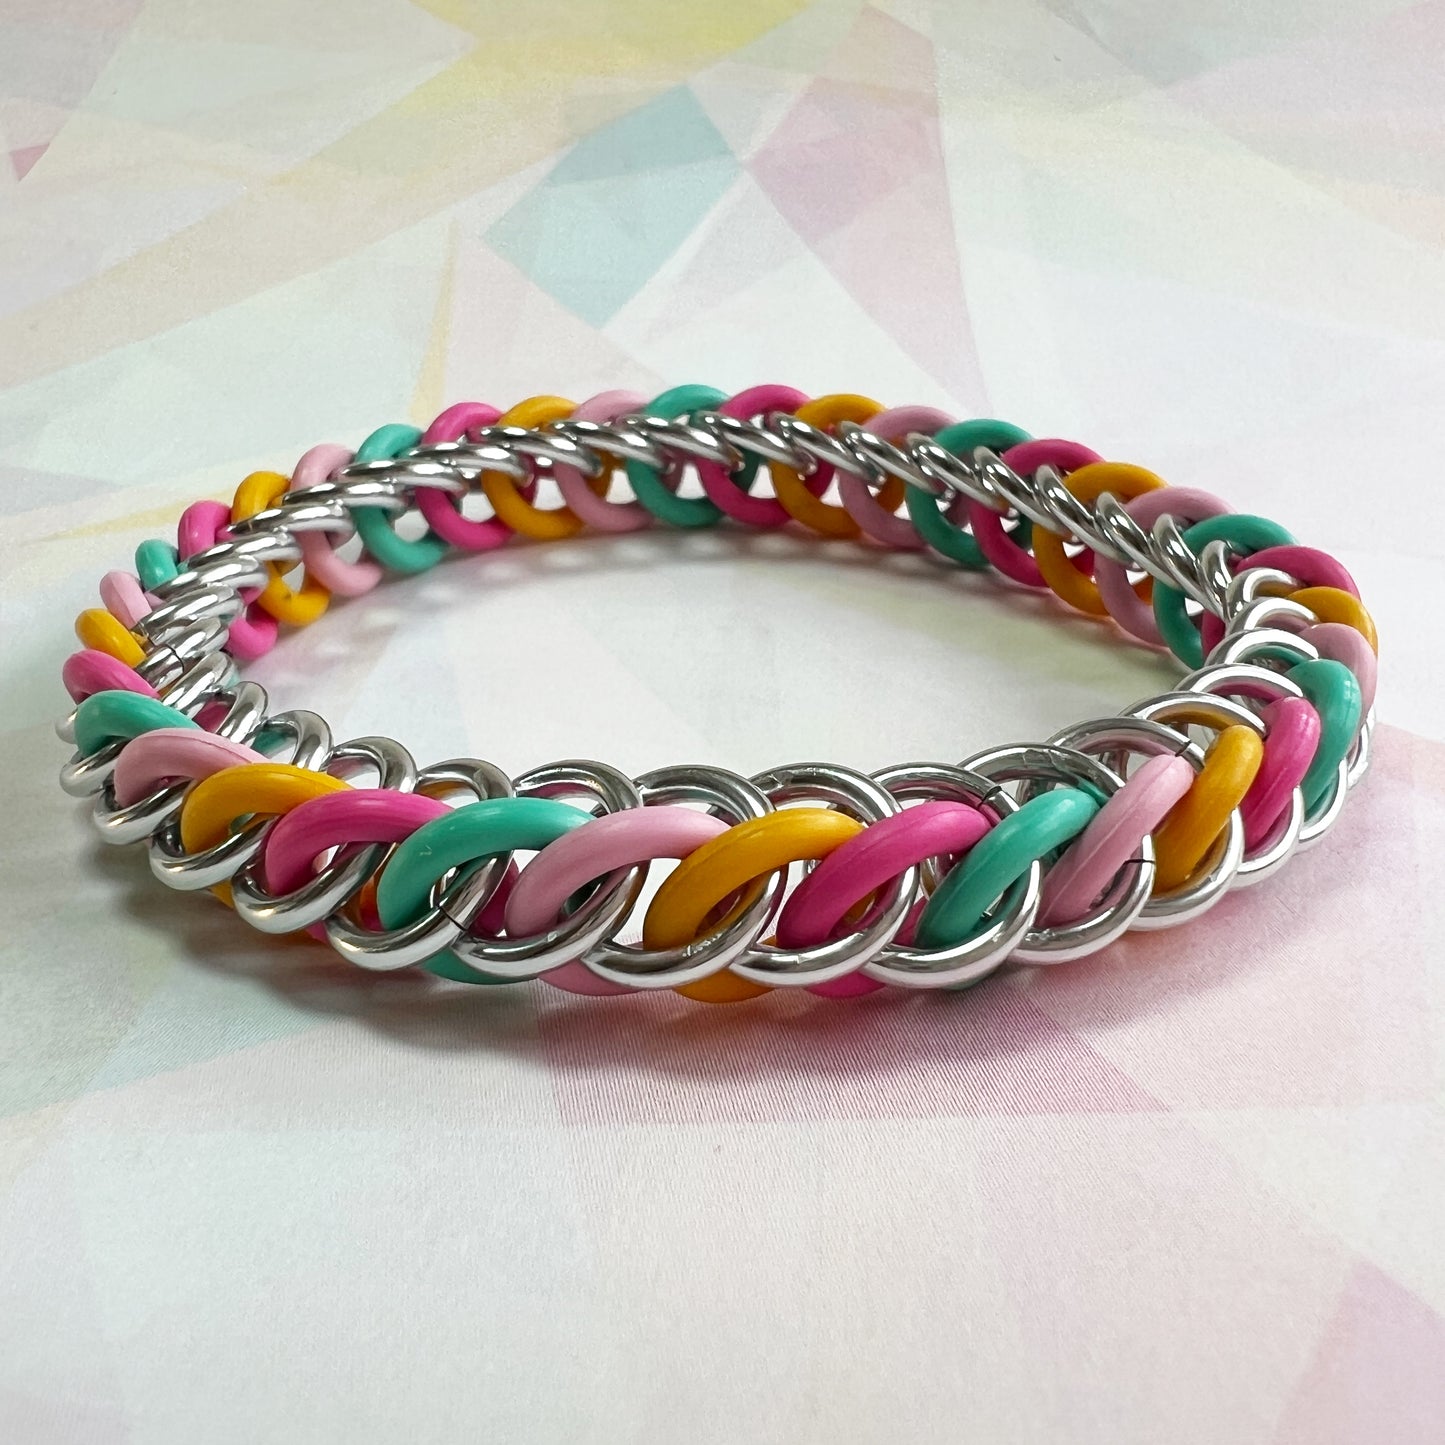 Half Persian Stretch Bracelet Kit 10mm with Free Video Sorbet Colors